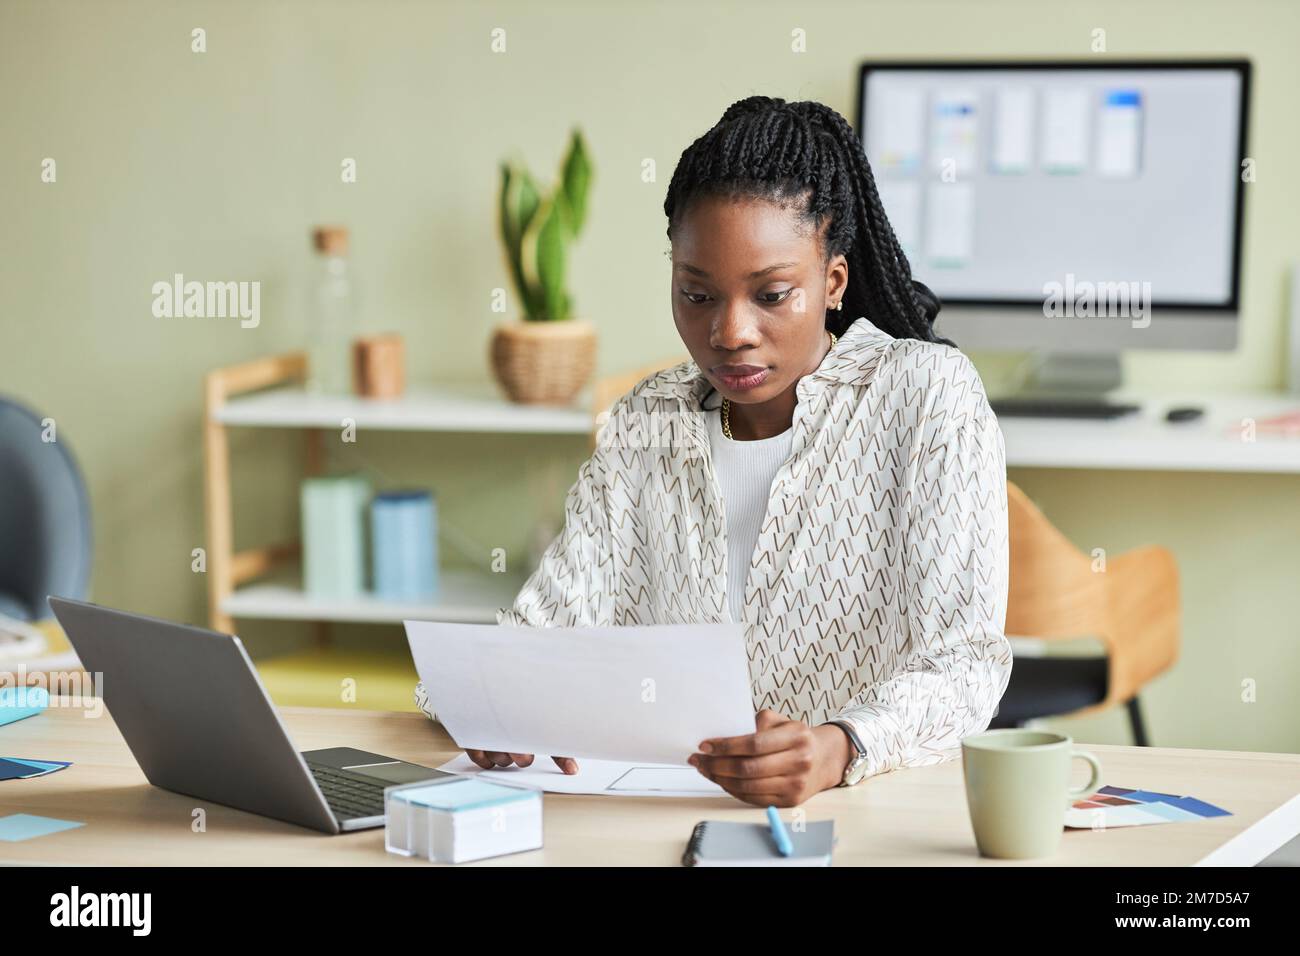 Minimal portrait of black young woman using laptop while working at desk in office setting, copy space Stock Photo